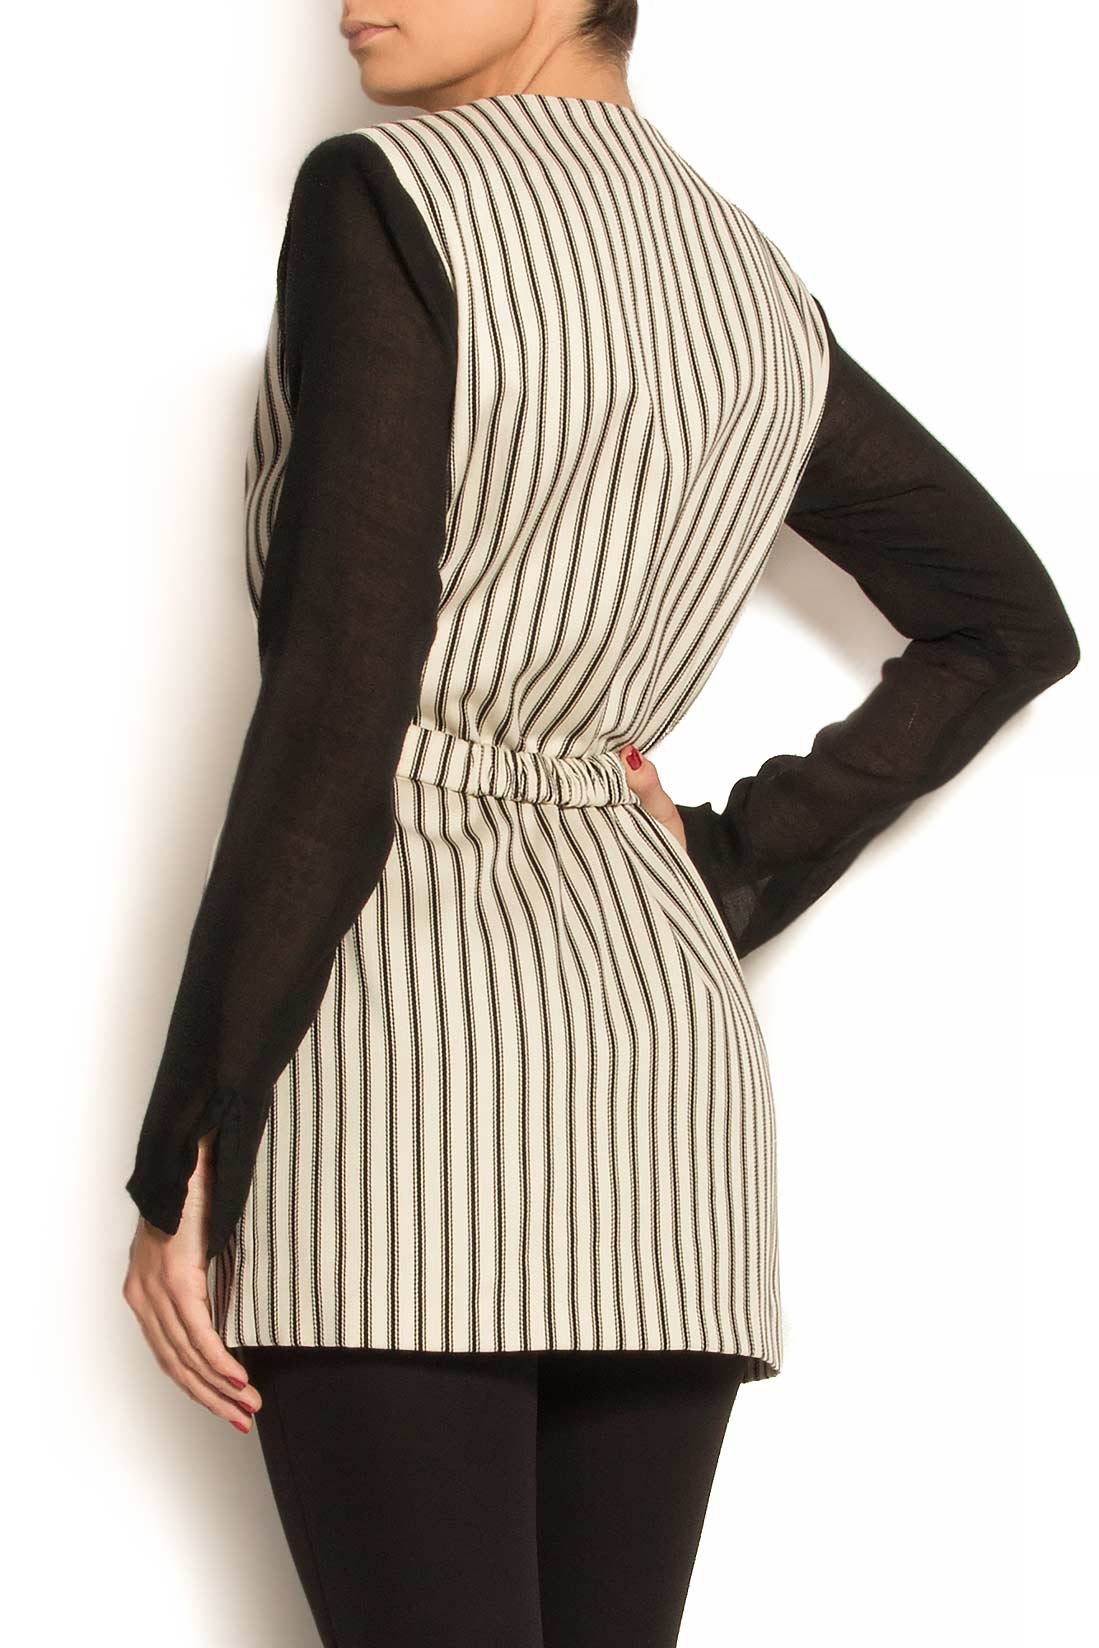 Stripped wool-cotton jacket ATU Body Couture image 3